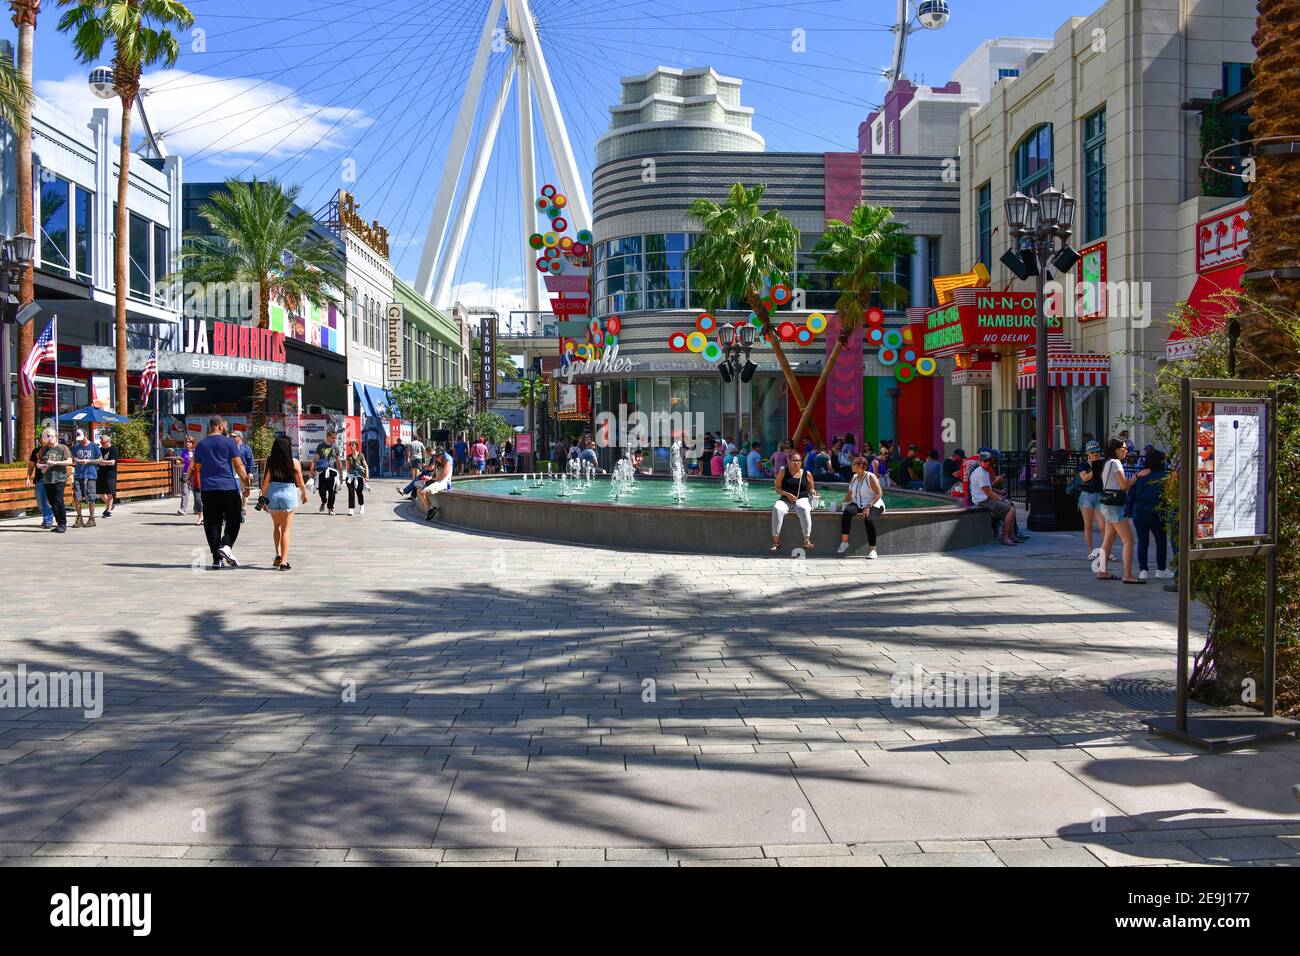 Nevada USA, 09-30-18 The LINQ Promenade is a dining, shopping and entertainment district featuring a 550-foot observation wheel located on the Las Veg Stock Photo